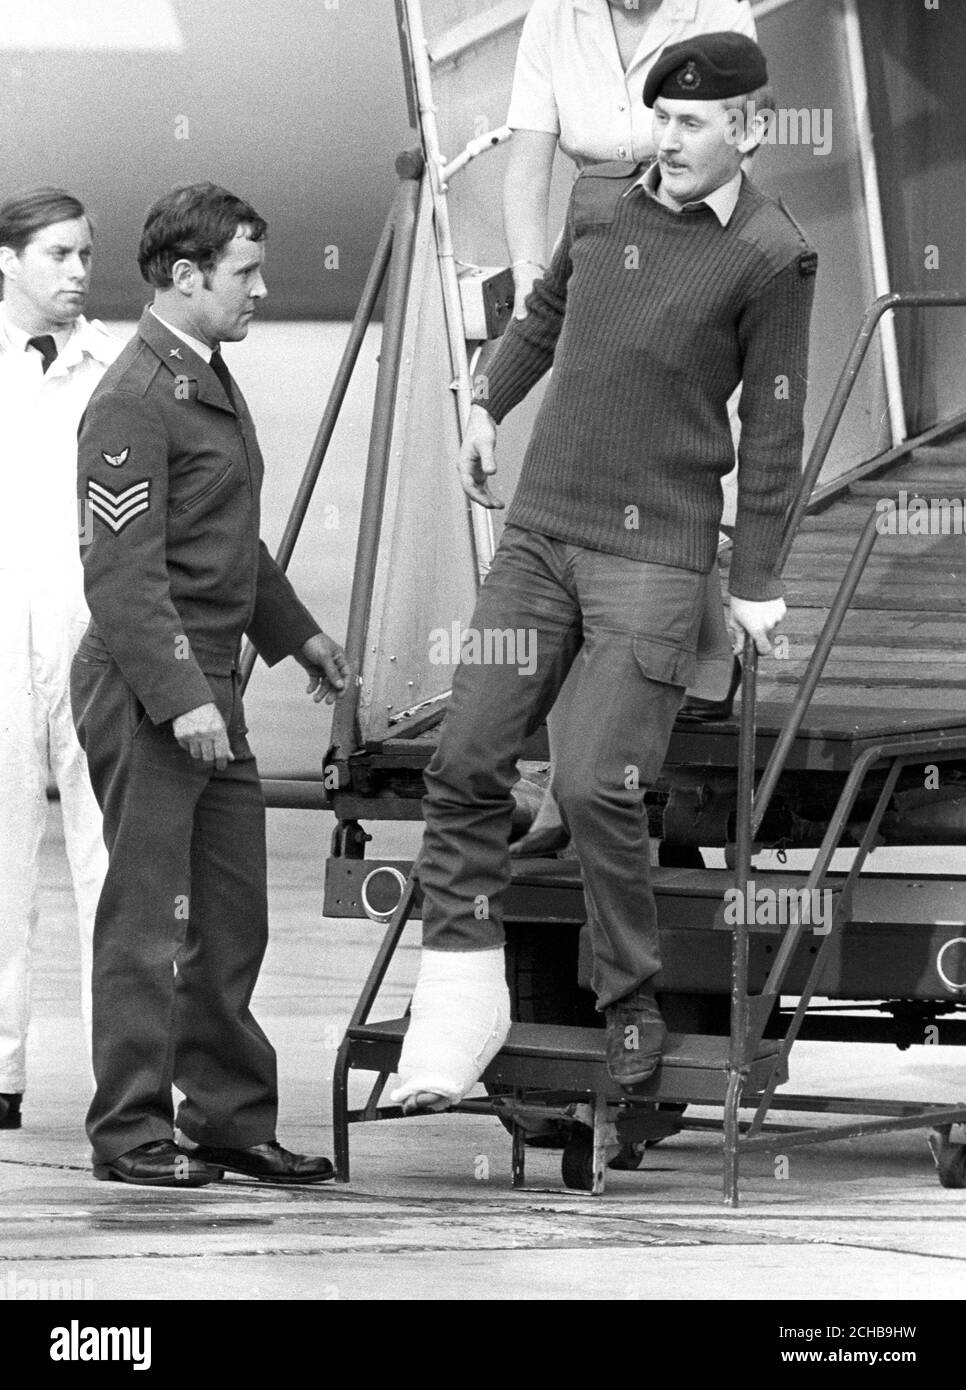 A wounded Royal Marine limps down the VC10 steps at RAF Brize Norton. They are the first British casualties from the Falklands War to come home and were transported to the Army/Air Force hospital at Wroughton, near Swindon. Stock Photo